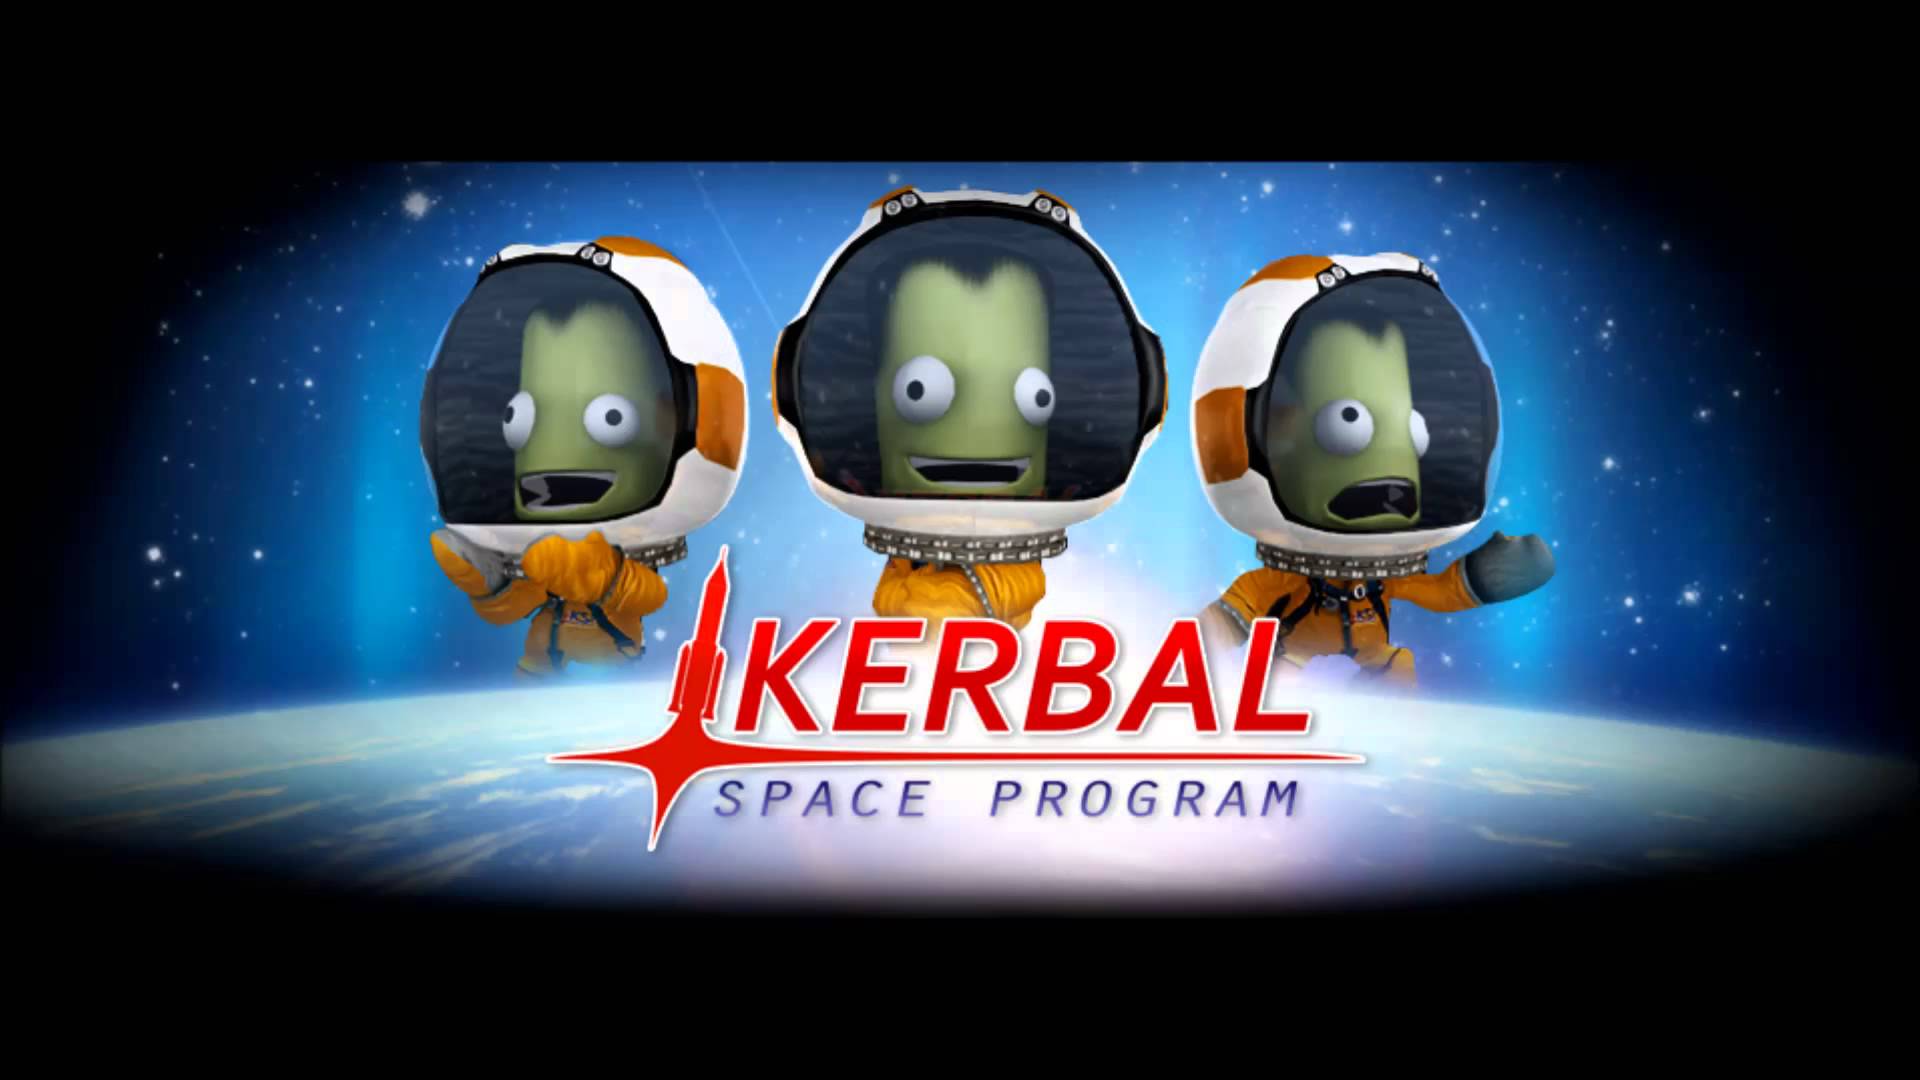 Amazing Kerbal Space Program Pictures & Backgrounds